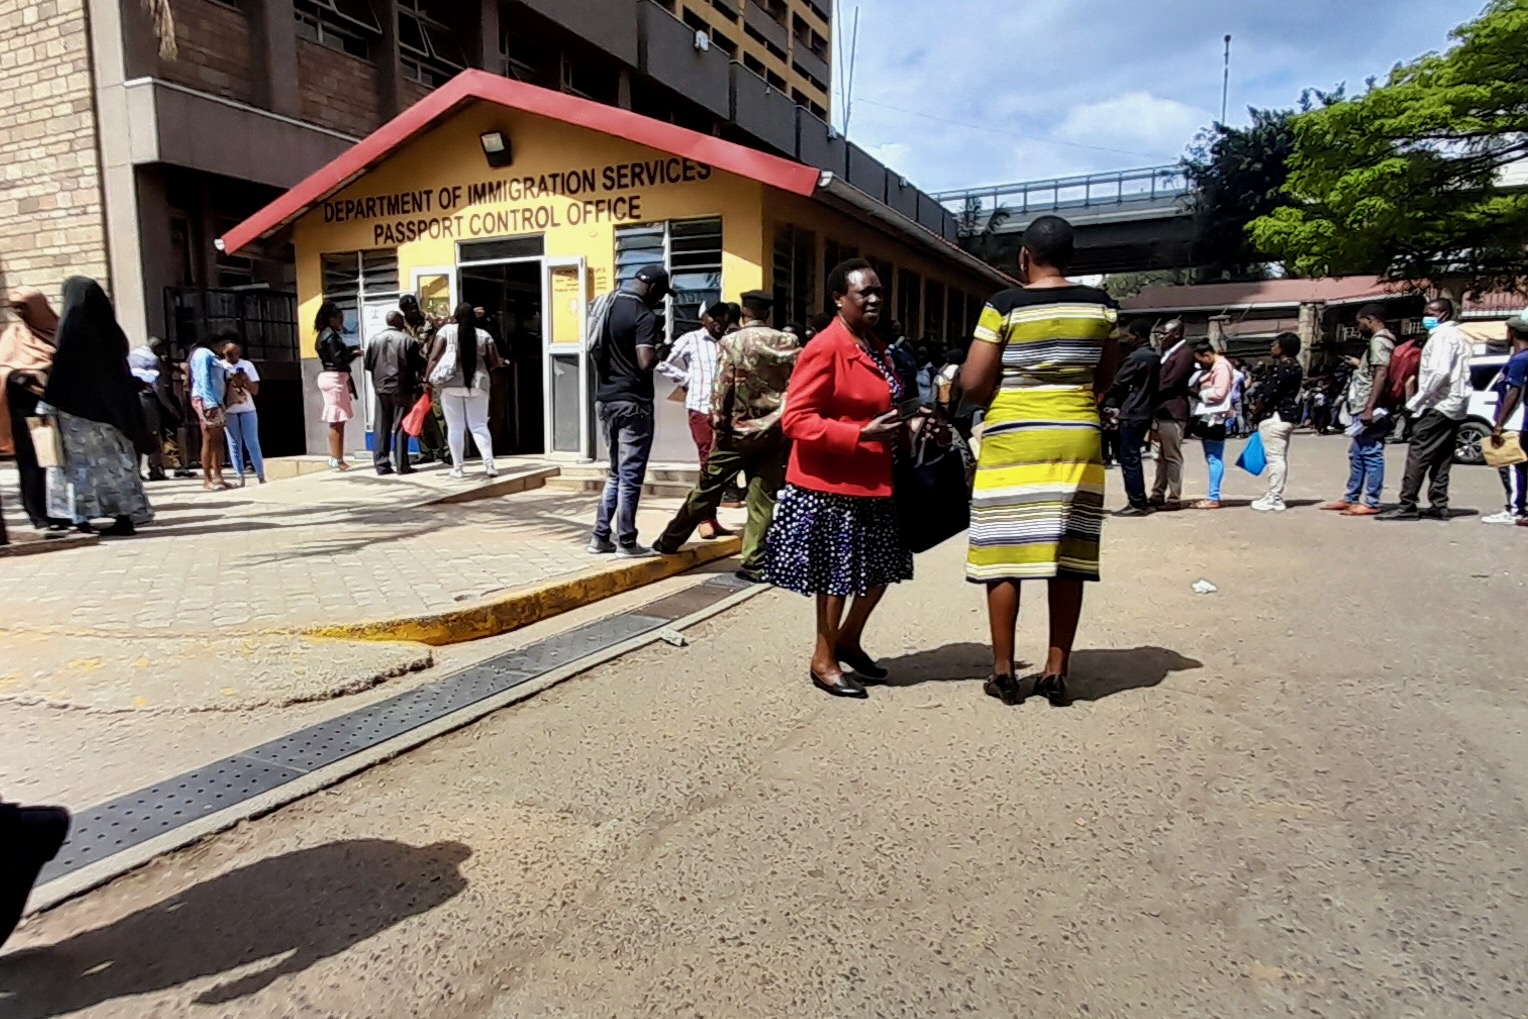 People wait outside the immigration office to process their documents and passport applications. Photo by Ngina Kirori